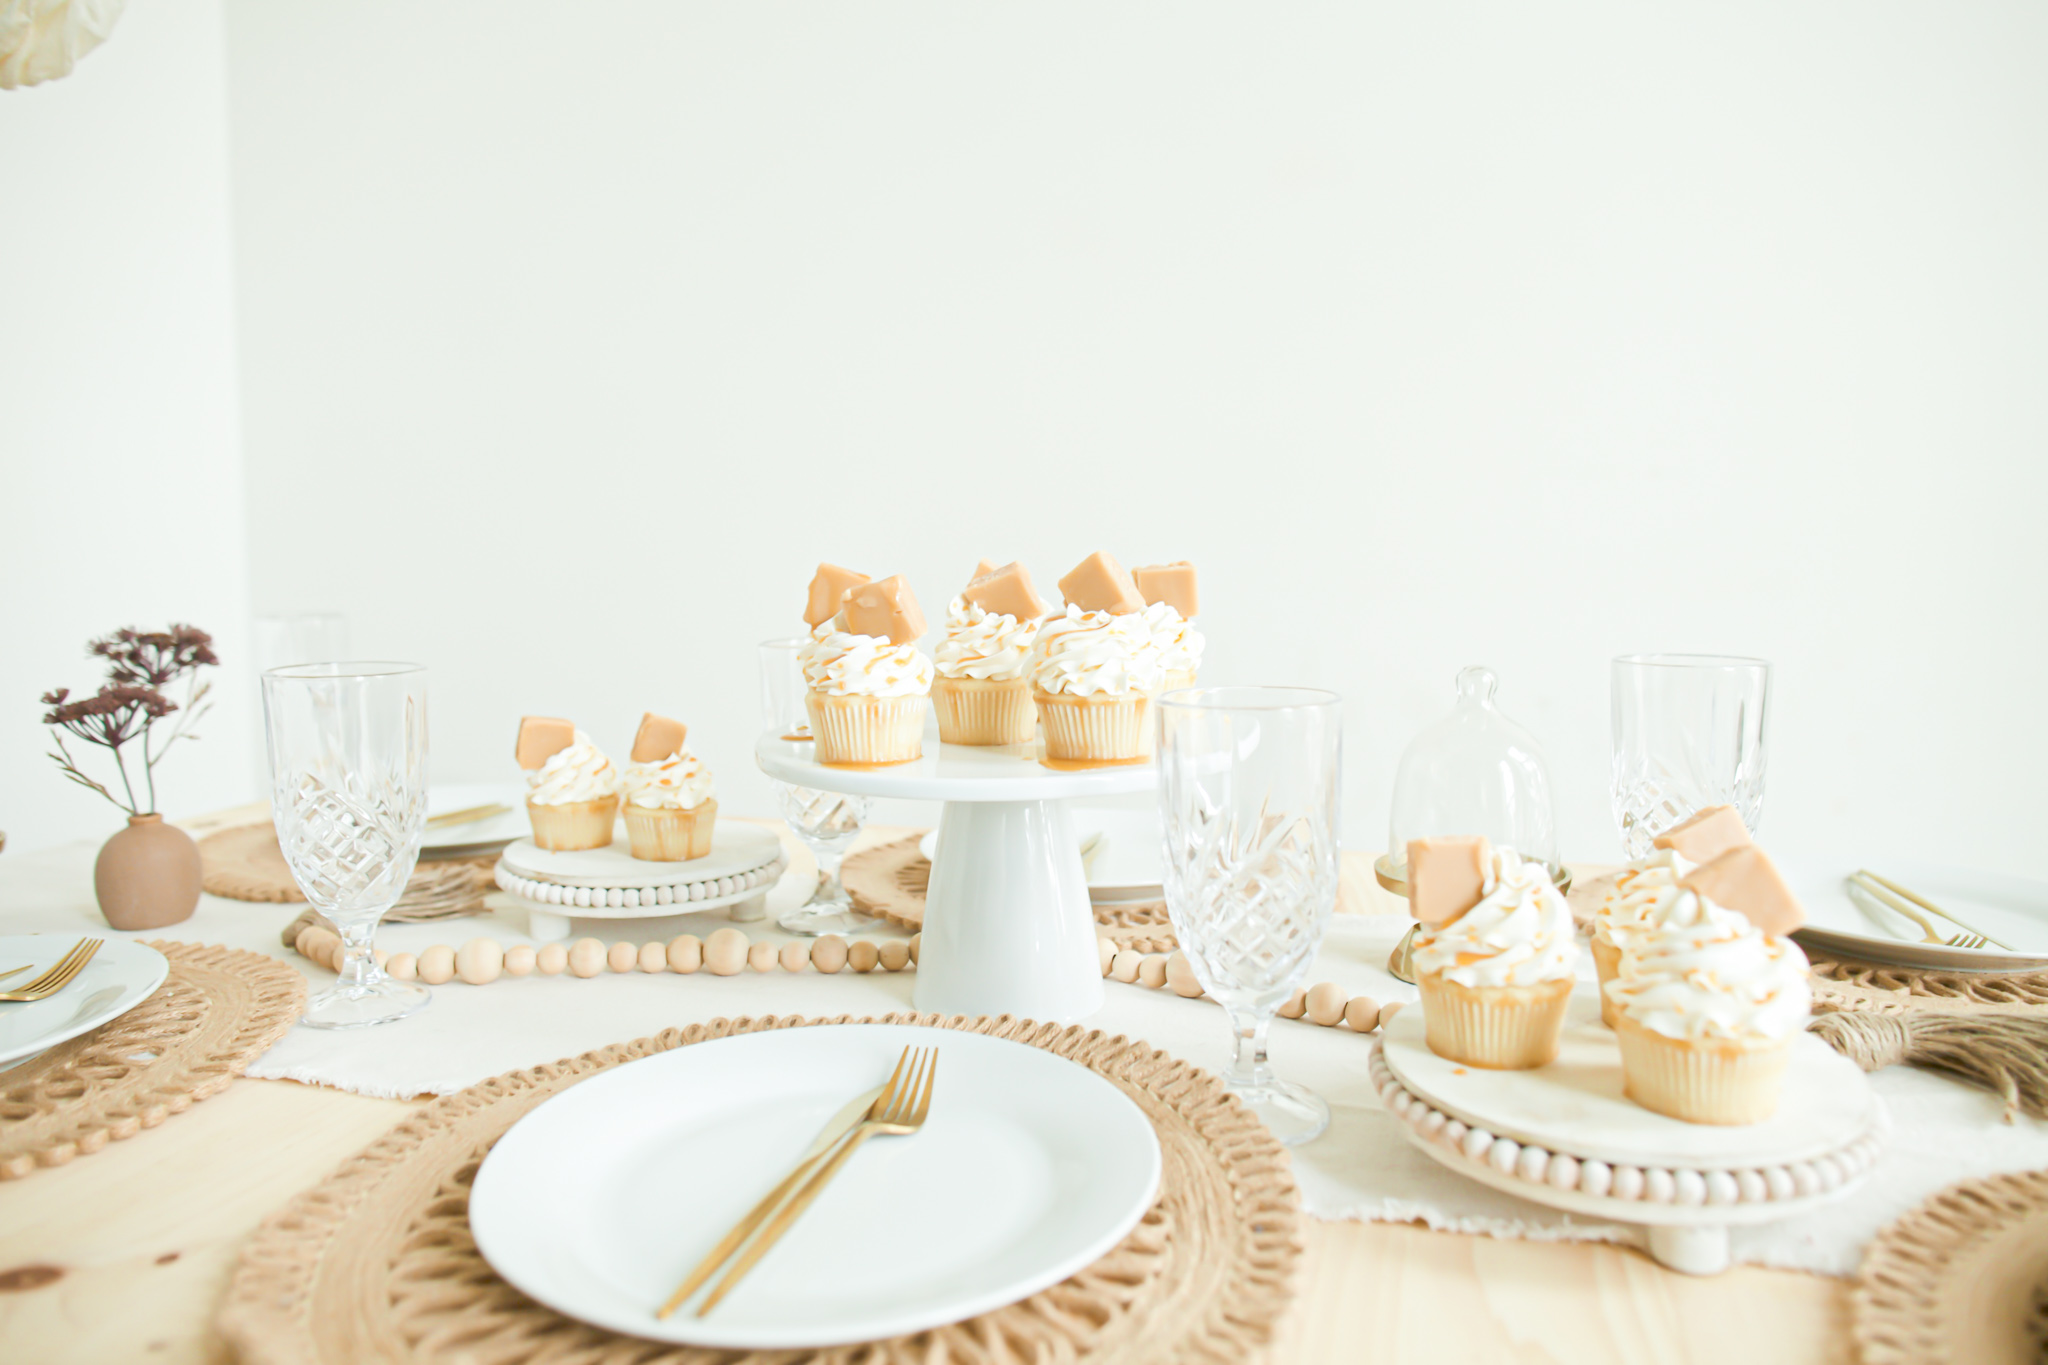 fall table decor and salted caramel cupcakes with white frosting and caramel drizzle